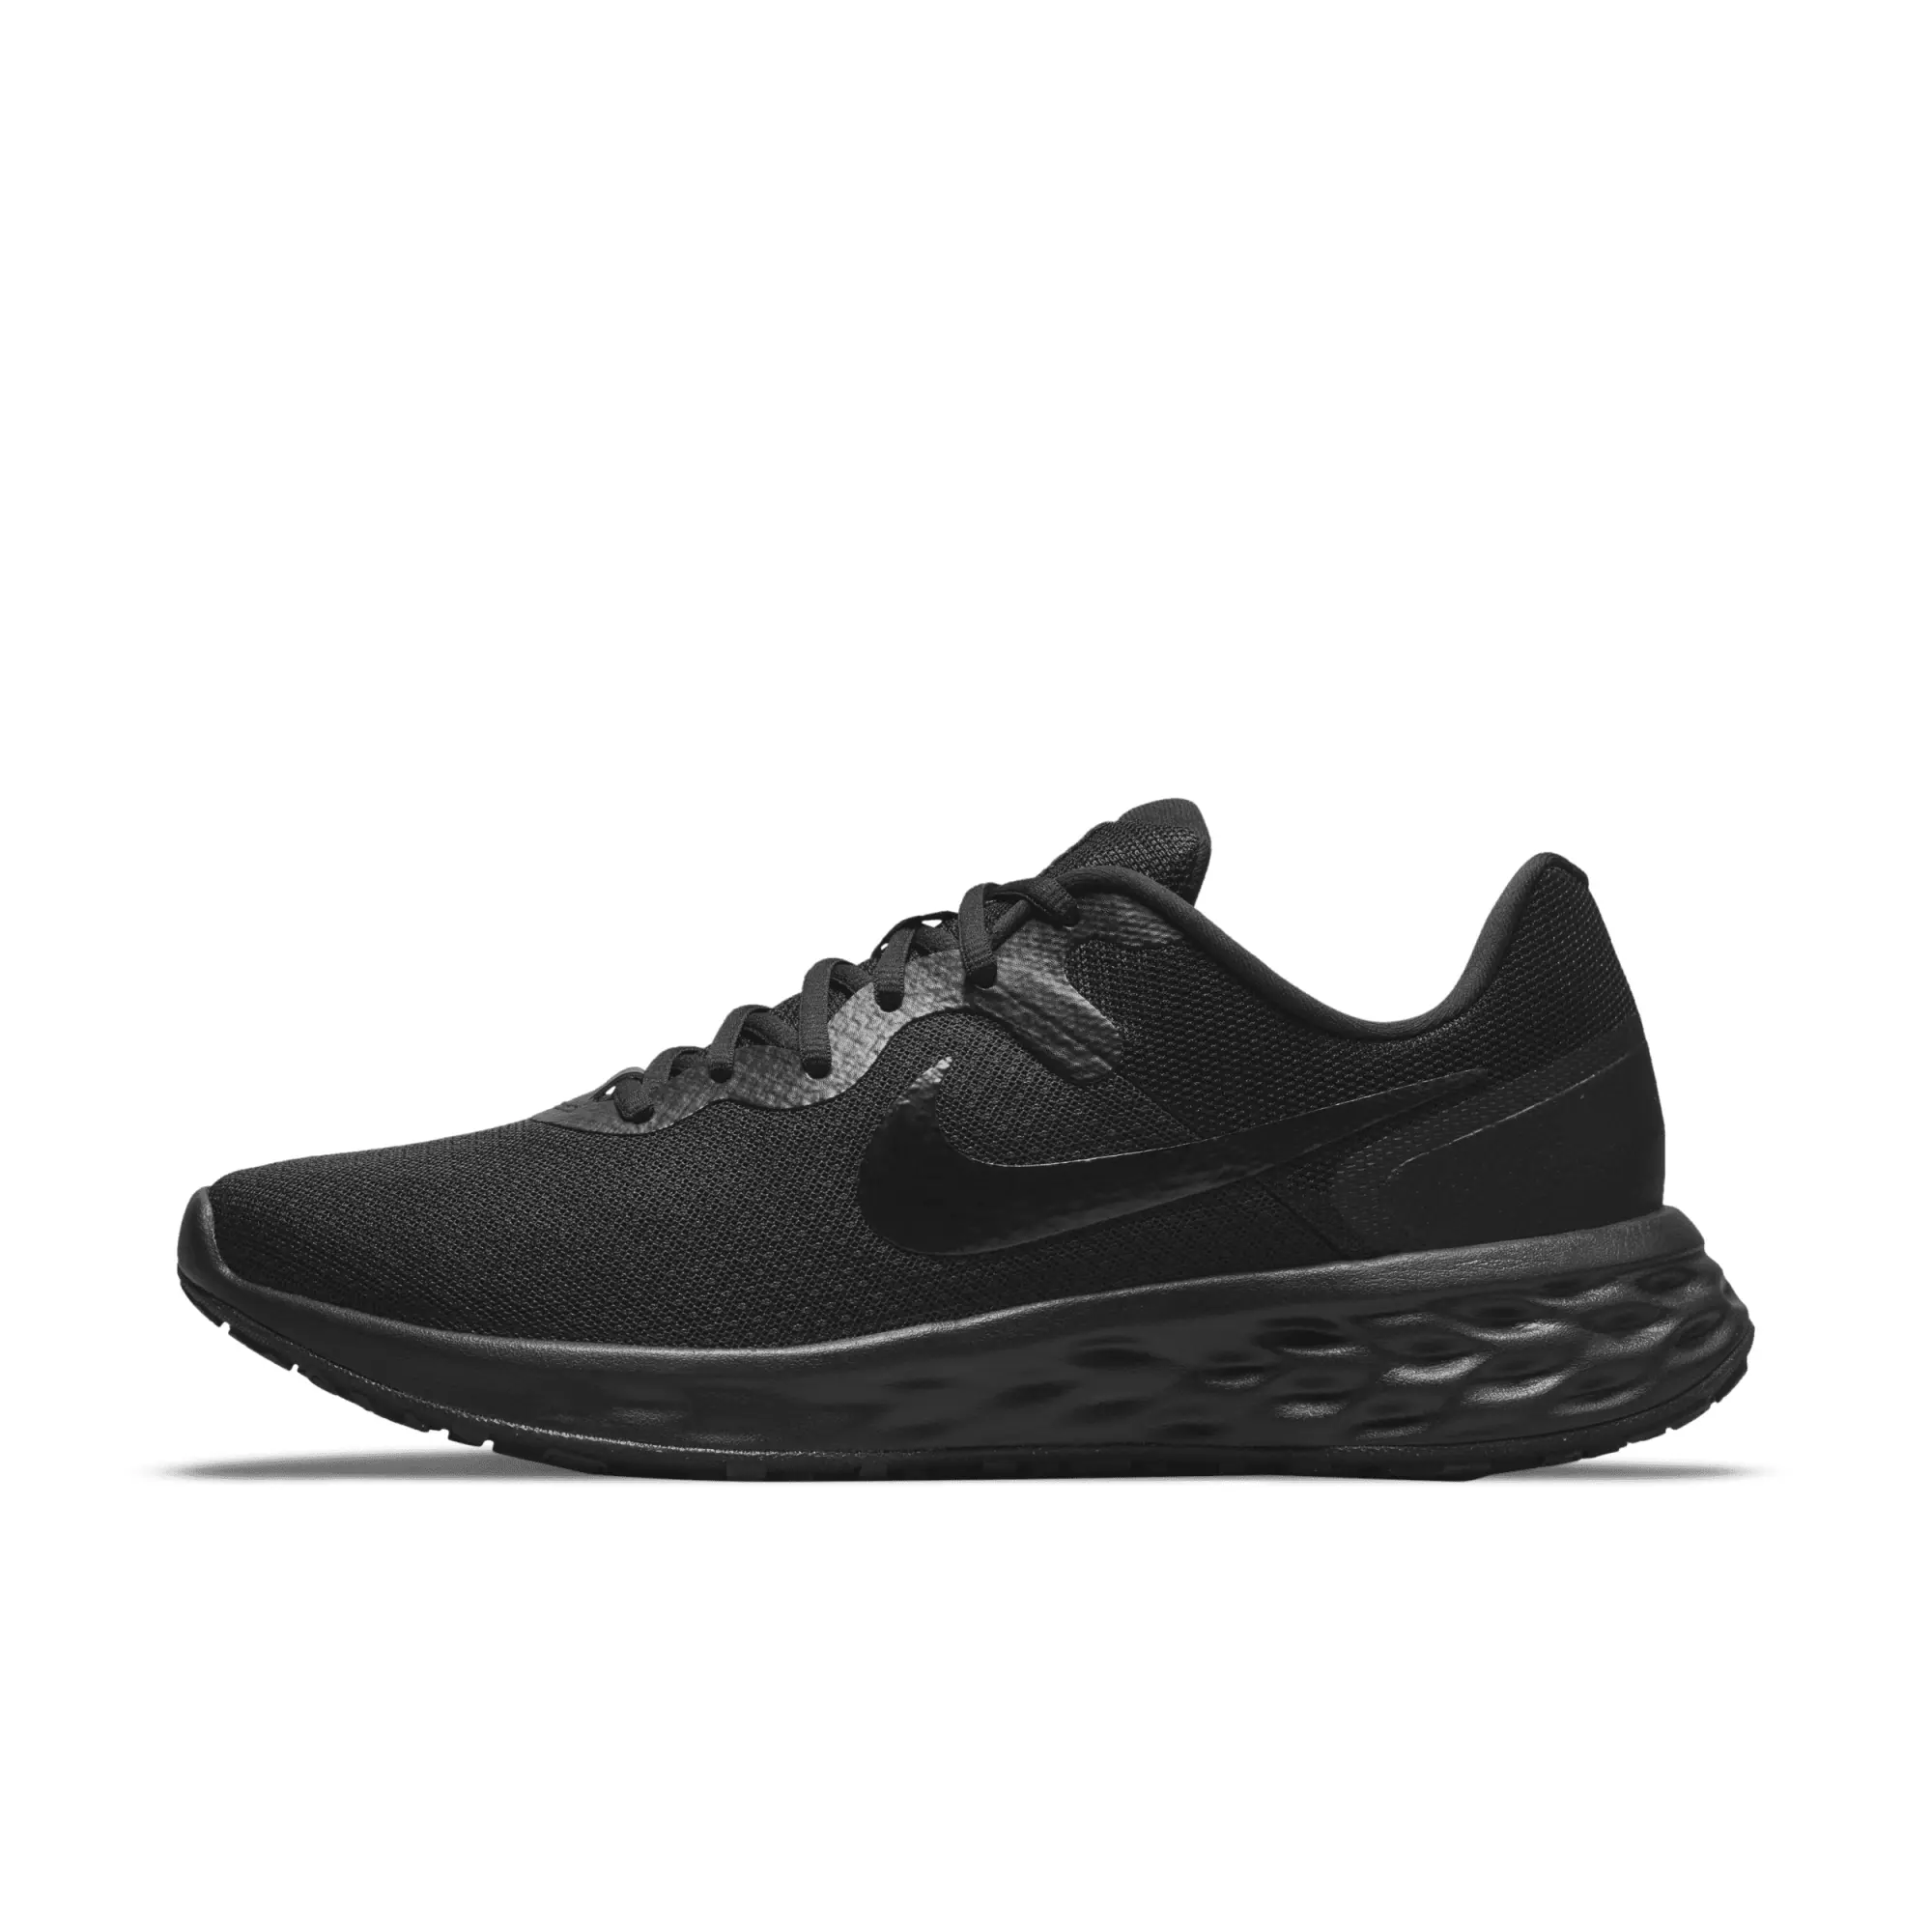 Nike Mens Running Trainers revolution 6 next na Lace Up black